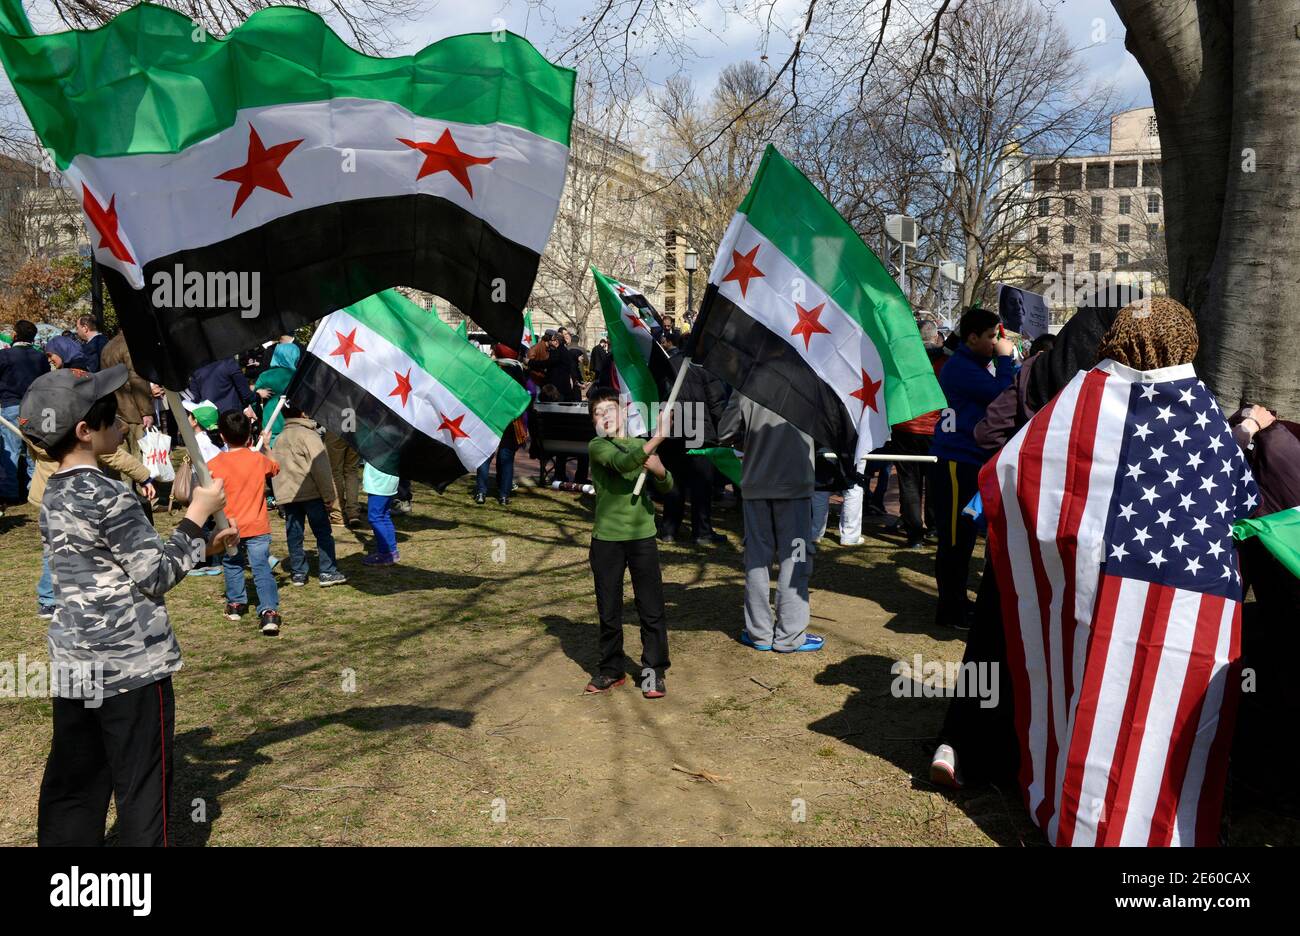 Nawal Abdul of Dearborn, Michigan (R) wears an American flag as her family waves Syrian flags (L) as they join dozens of protestors gathered to mark the 3rd anniversary of the Syrian revolution. in Lafayette Park, across from the White House, in Washington, March 15, 2014. The anti-Assad regime demonstrators called for an end to the violence, where reportedly more than 100,000 people have lost their lives, leaving cities and towns devastated and millions of refugees.         REUTERS/Mike Theiler   (UNITED STATES - Tags: POLITICS CIVIL UNREST) Stock Photo